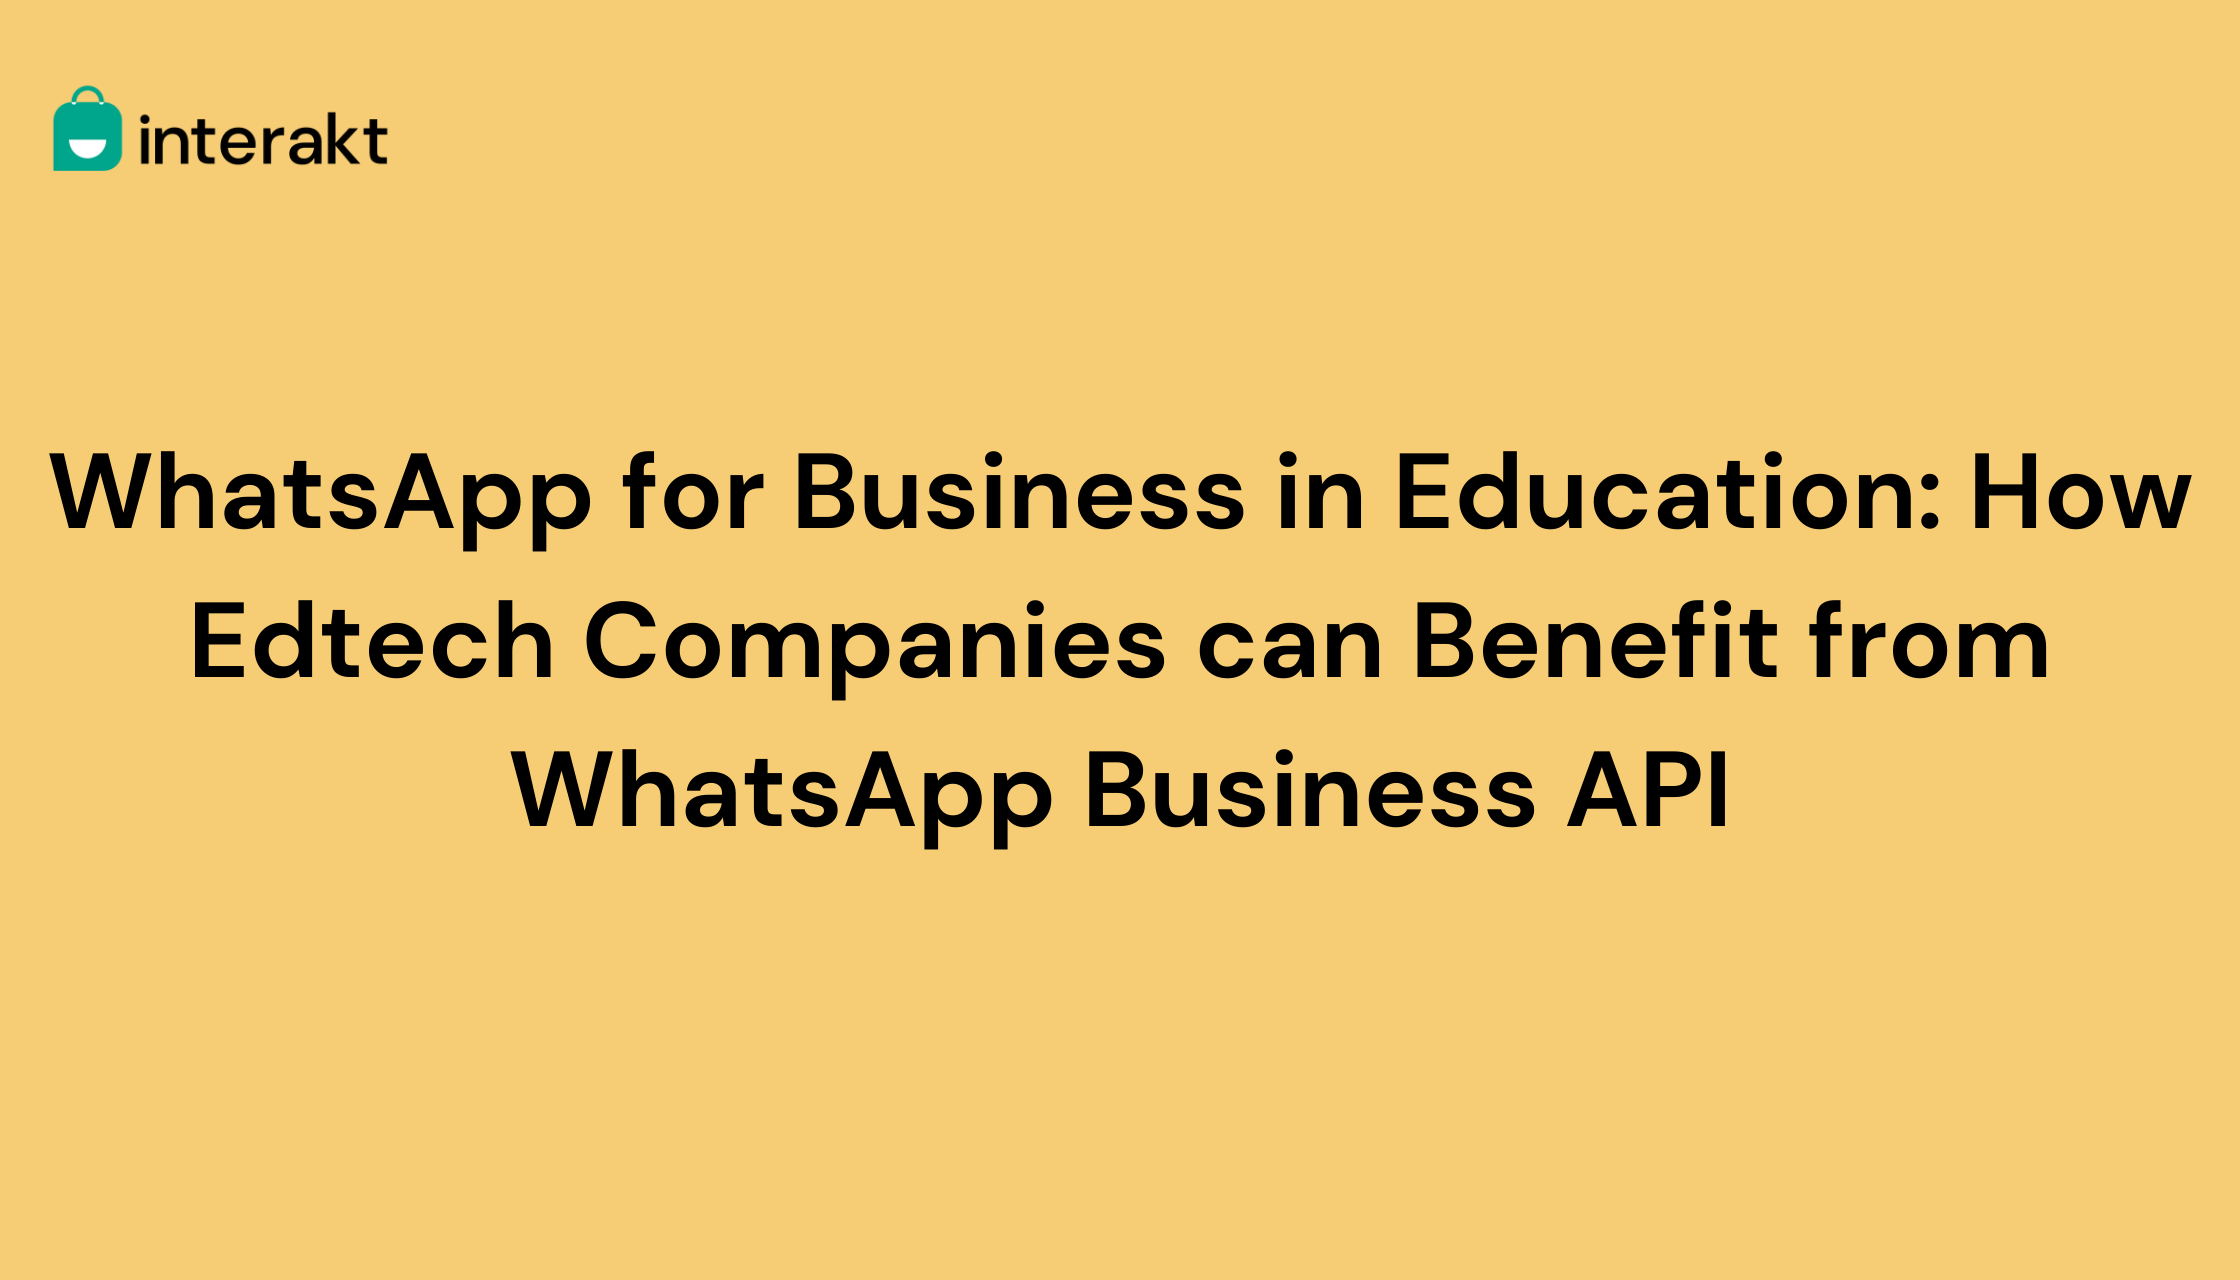 WhatsApp for Business in Education